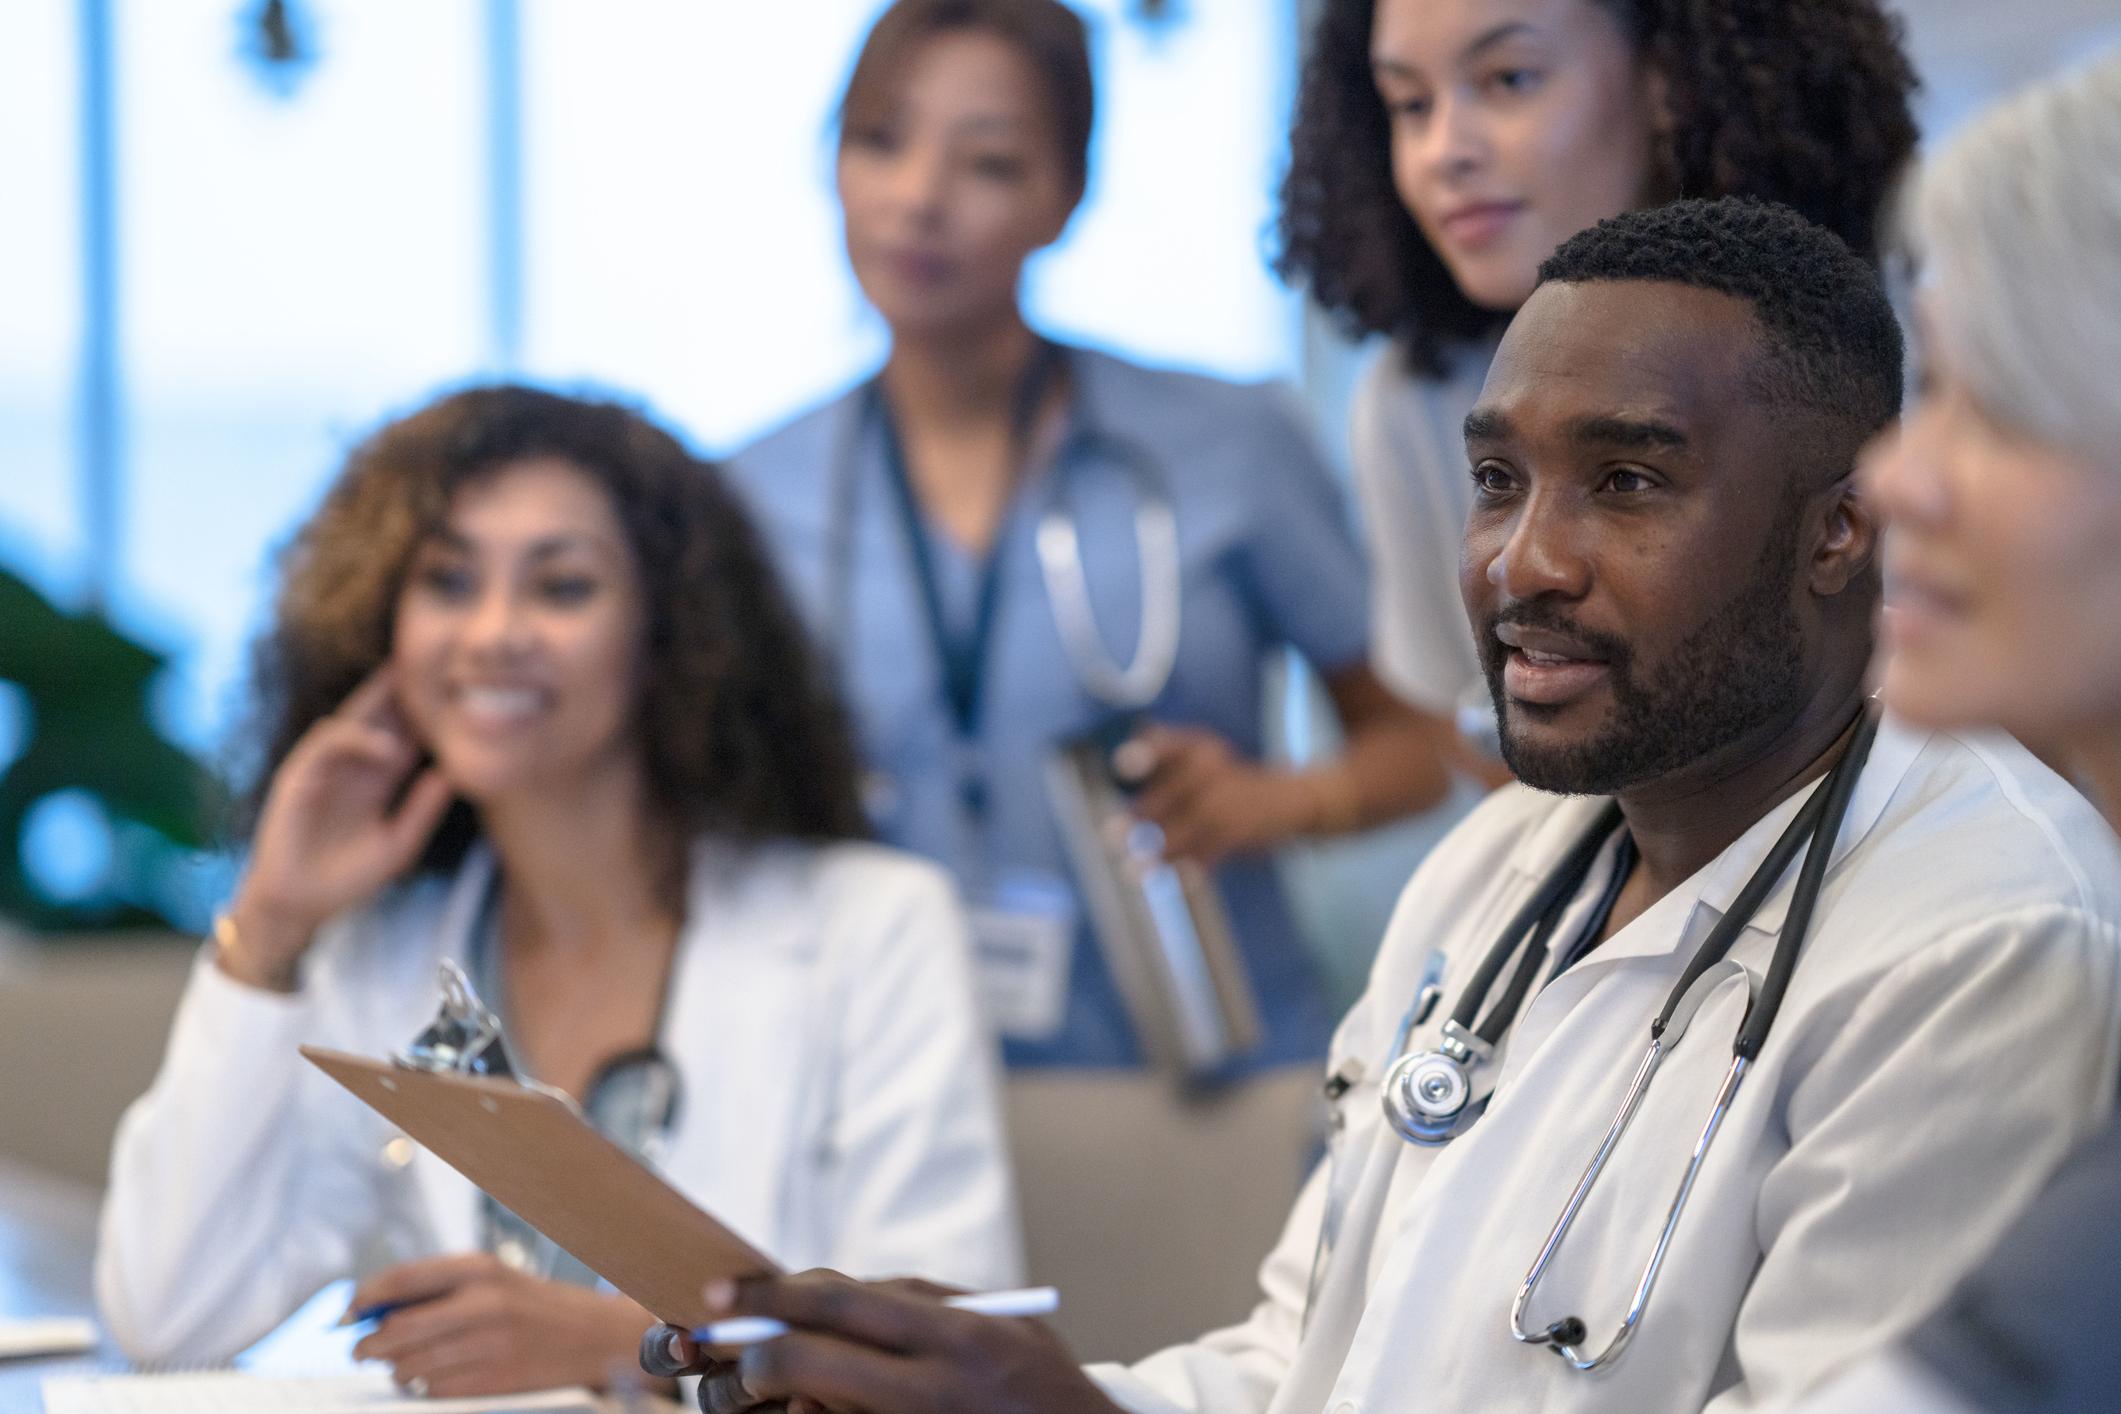 Landing Your First Job and Reducing Your Medical School Debt